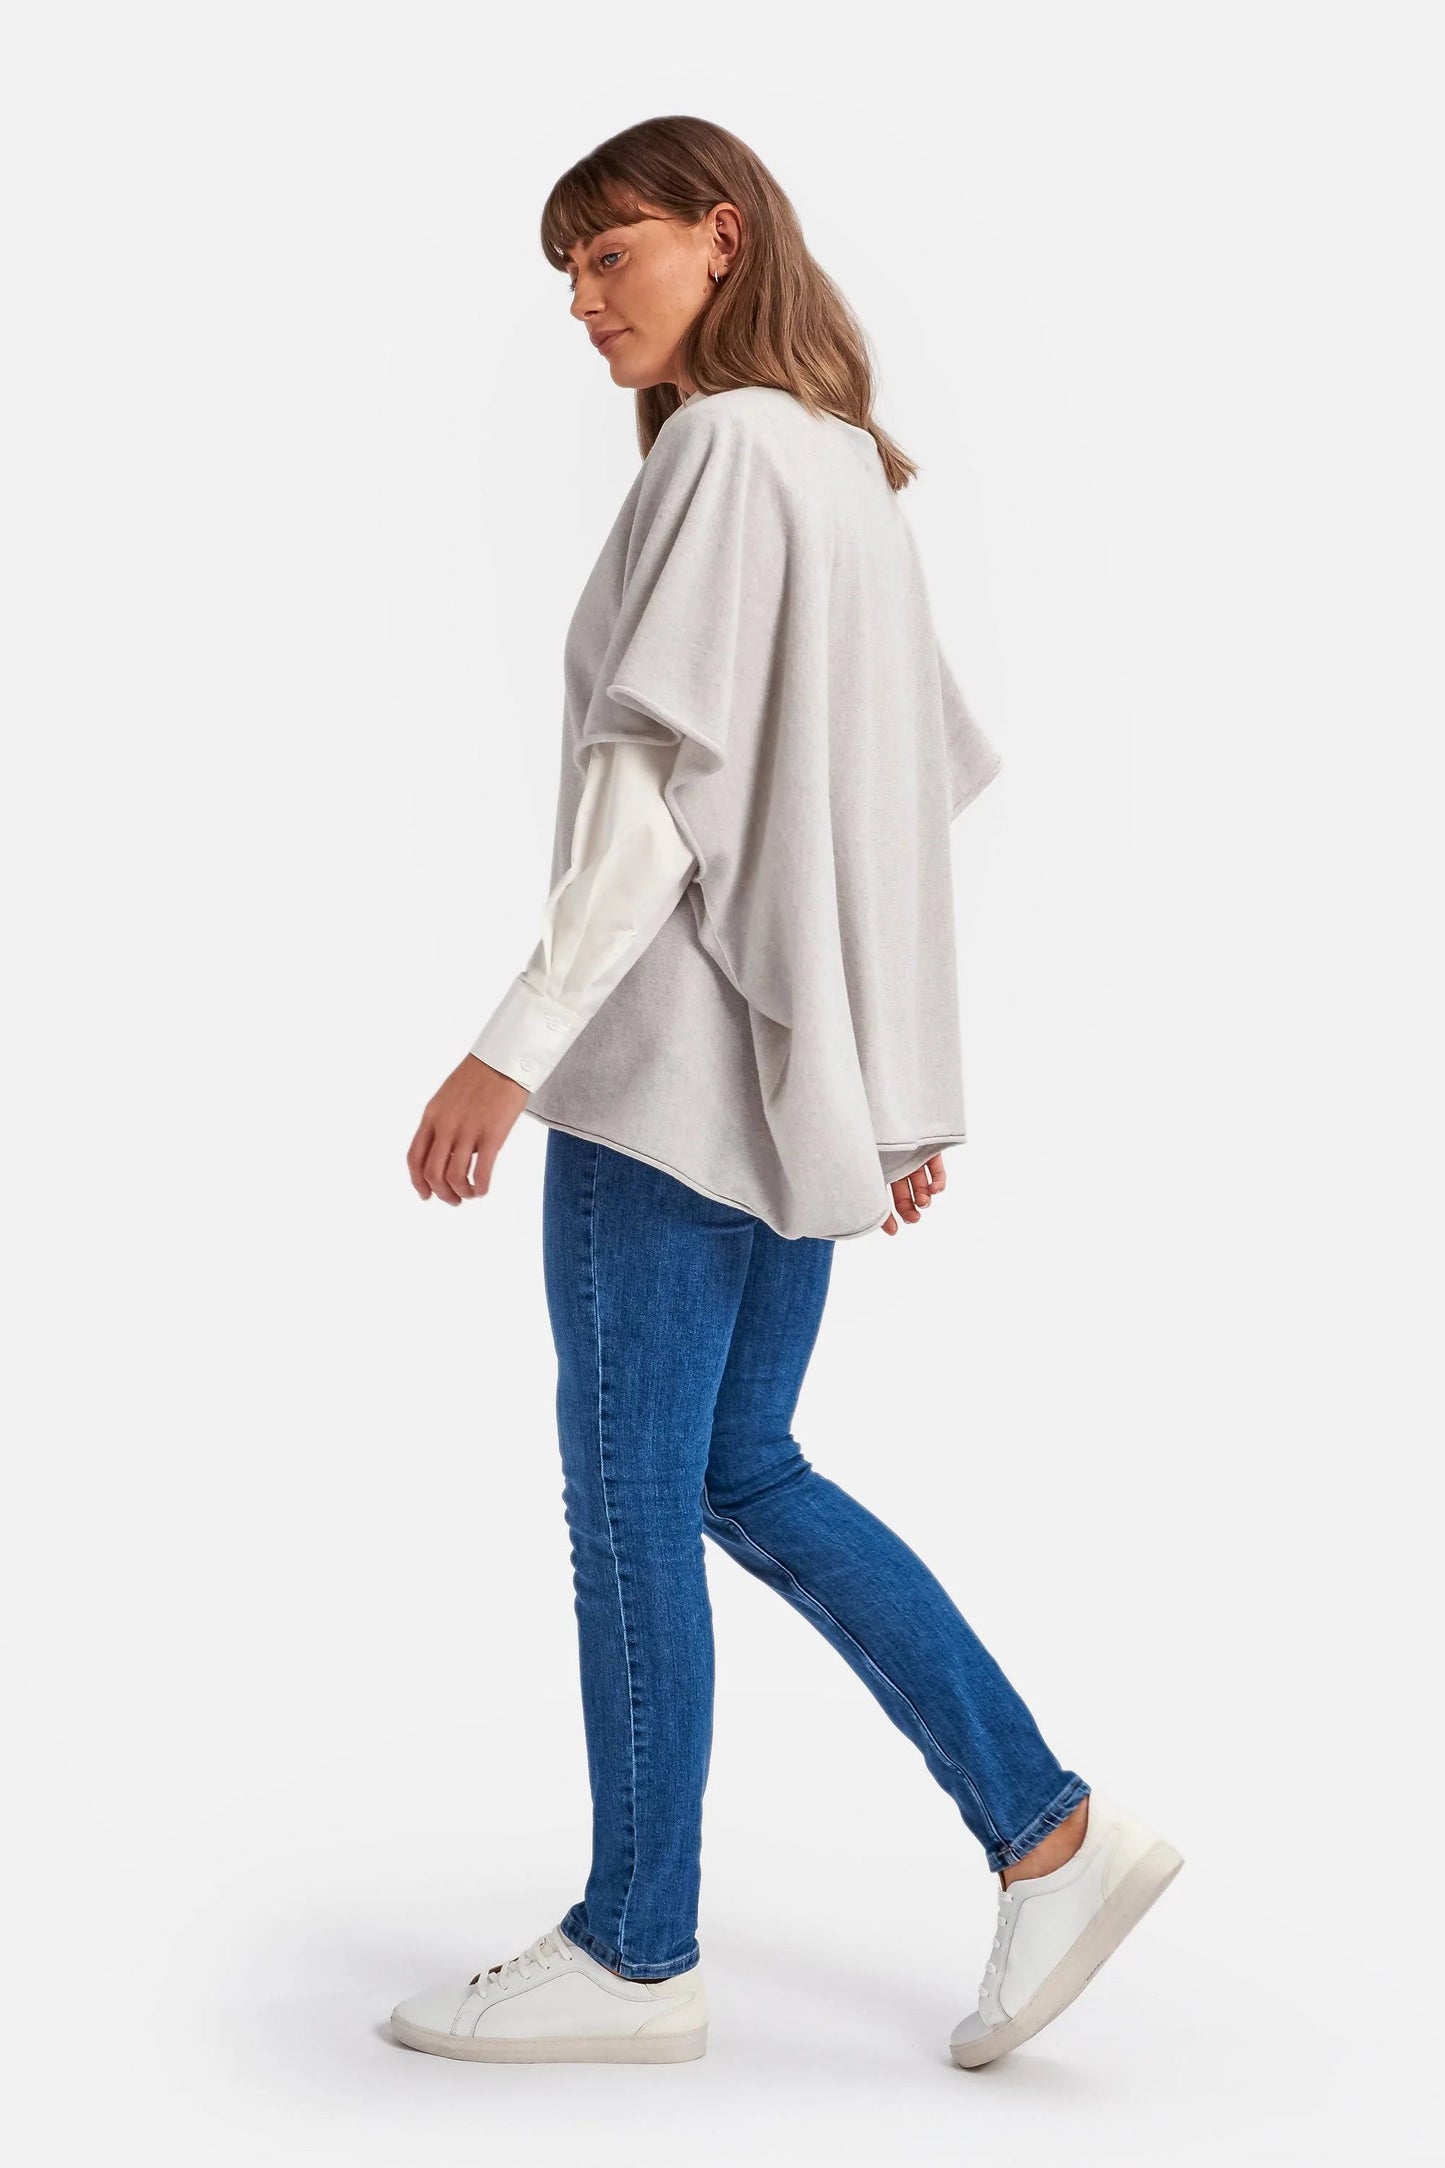 Cashmere & Merino Wool Boat Neck Poncho in Grey Marl By Woodcock & Cavendish for sale - Woodcock and Cavendish